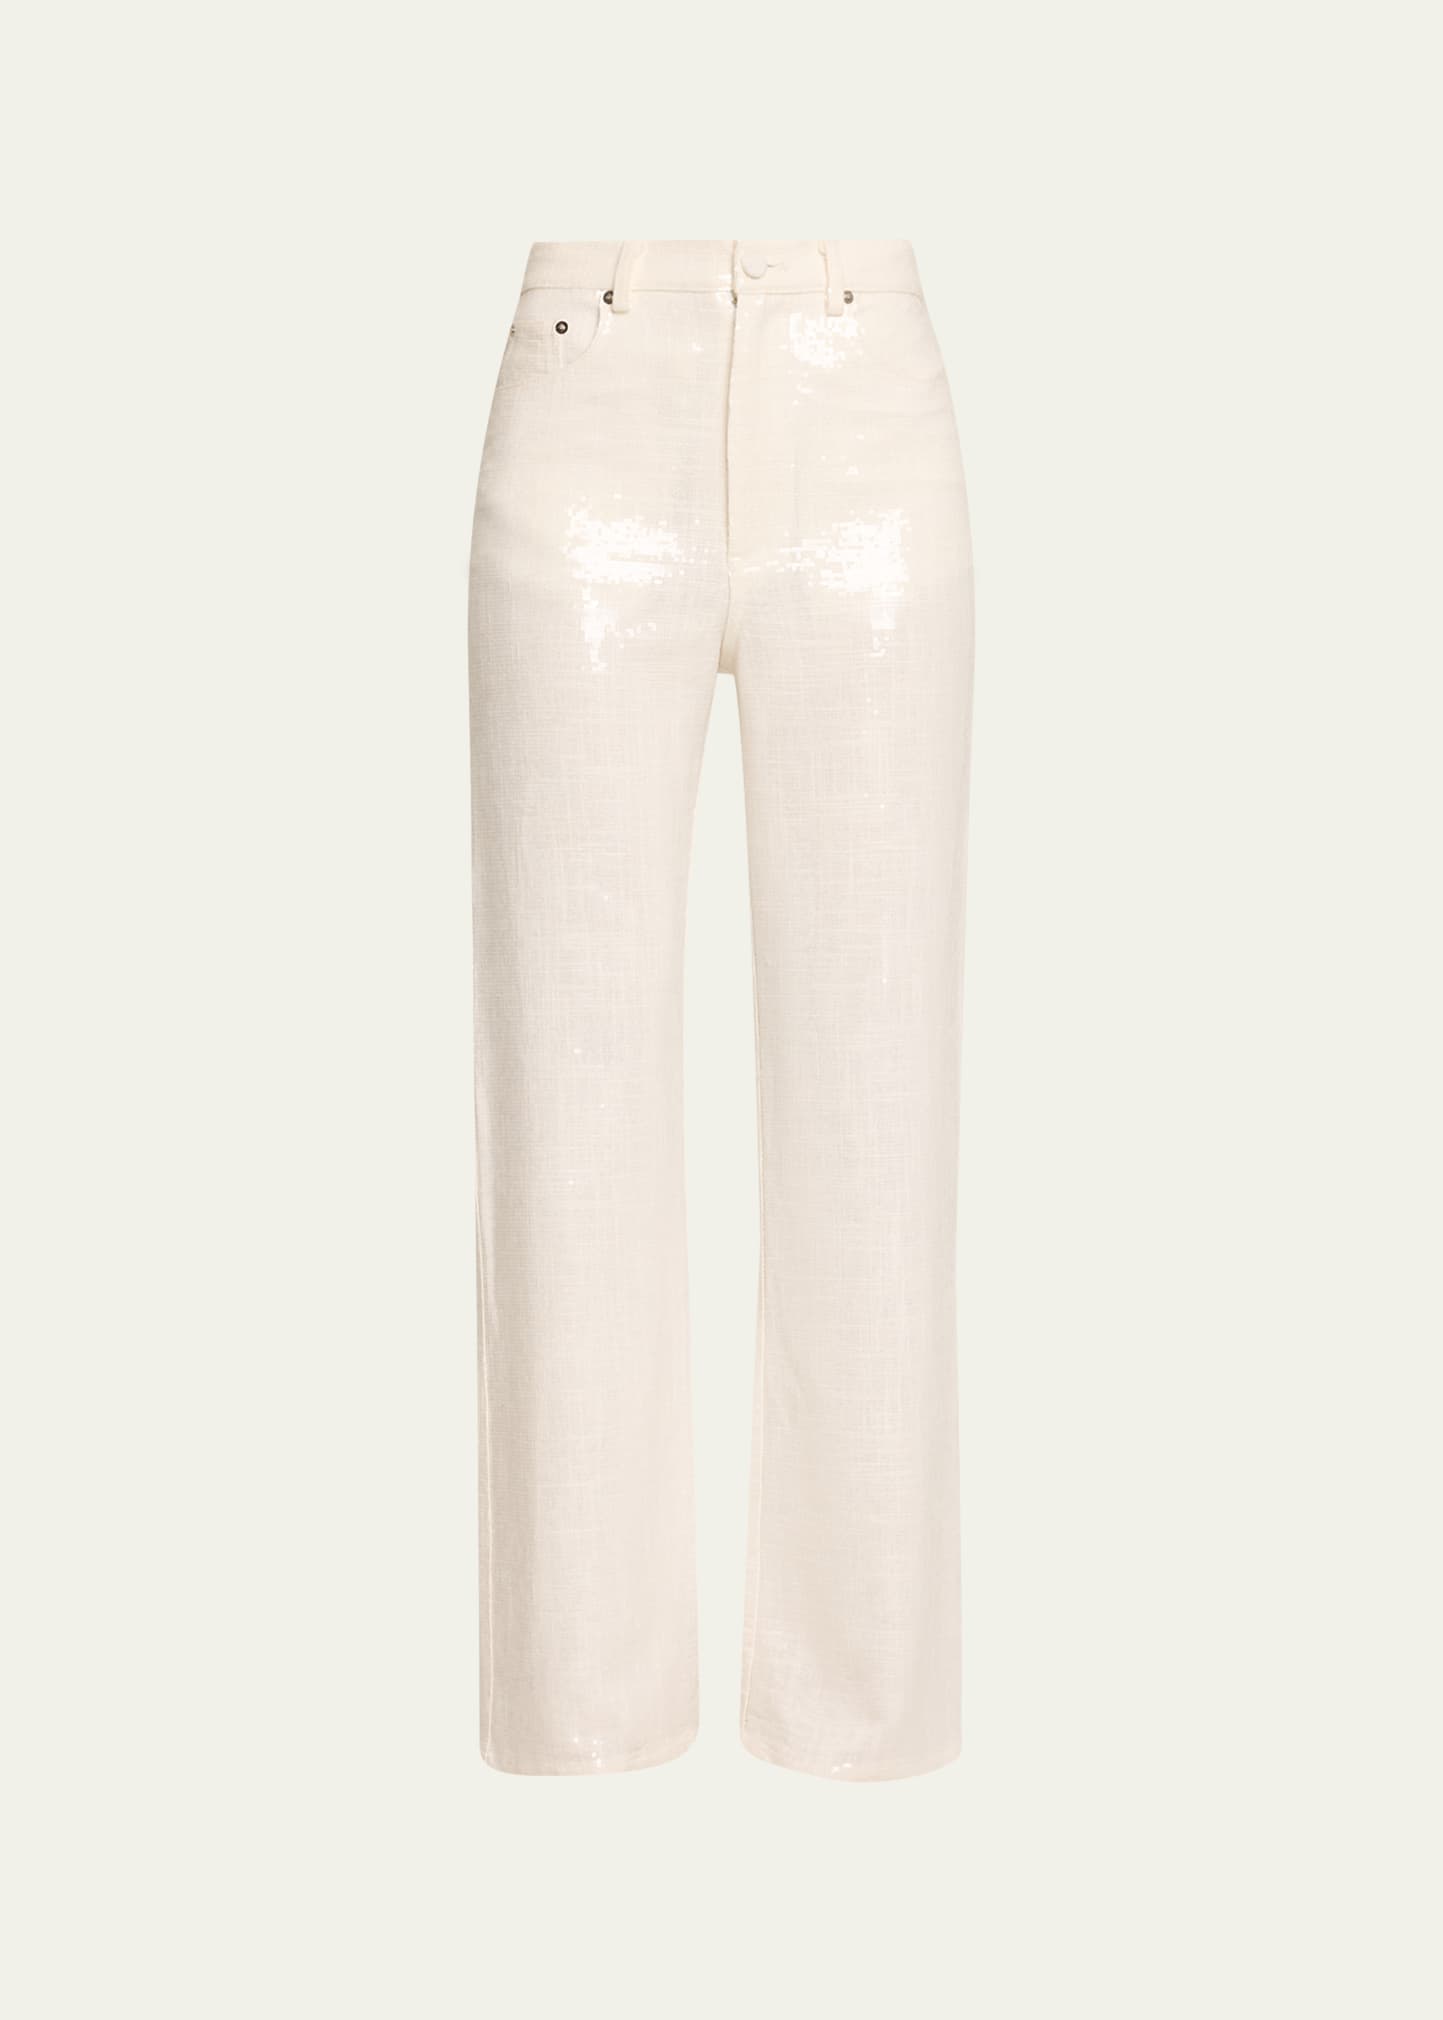 Theophilio Sequined Straight Linen Pants In White